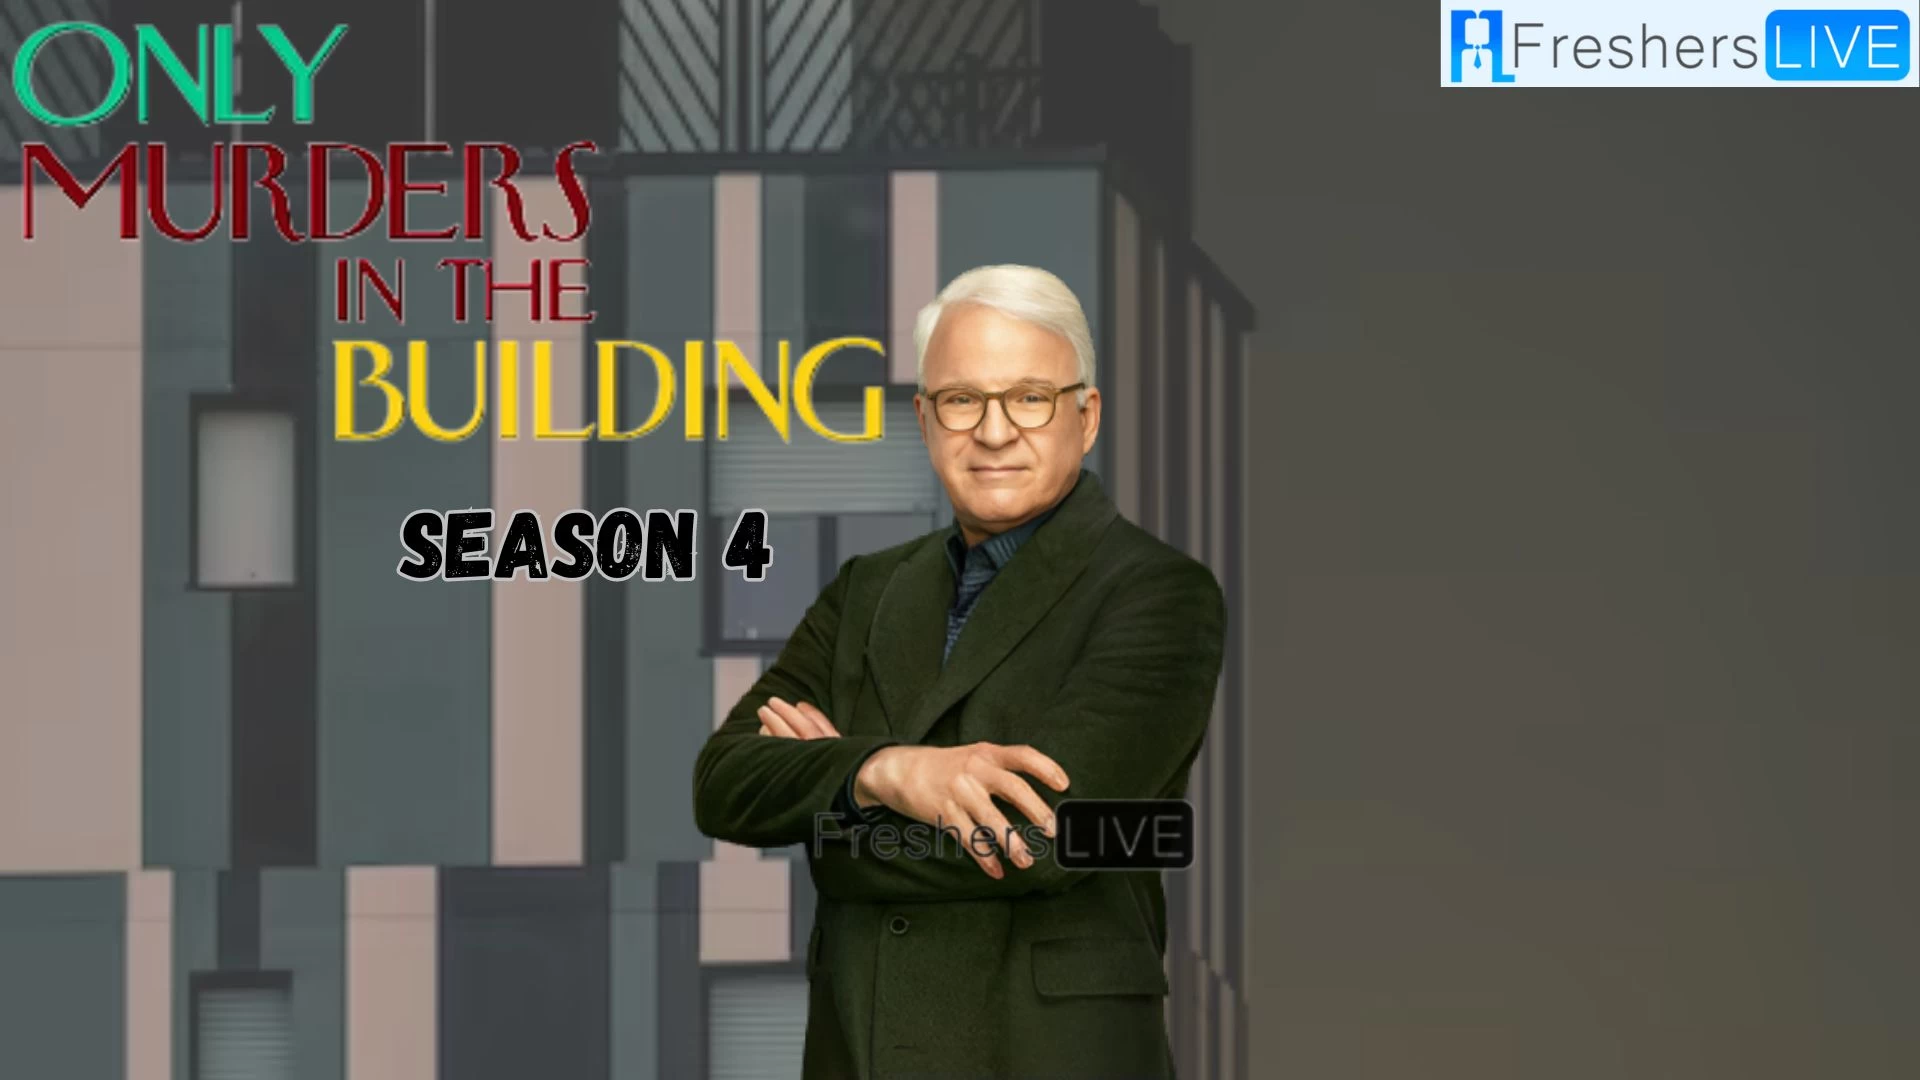 Only Murders In The Building Season 4, When Is 'only Murders In The Building' Season 4 Coming Out?